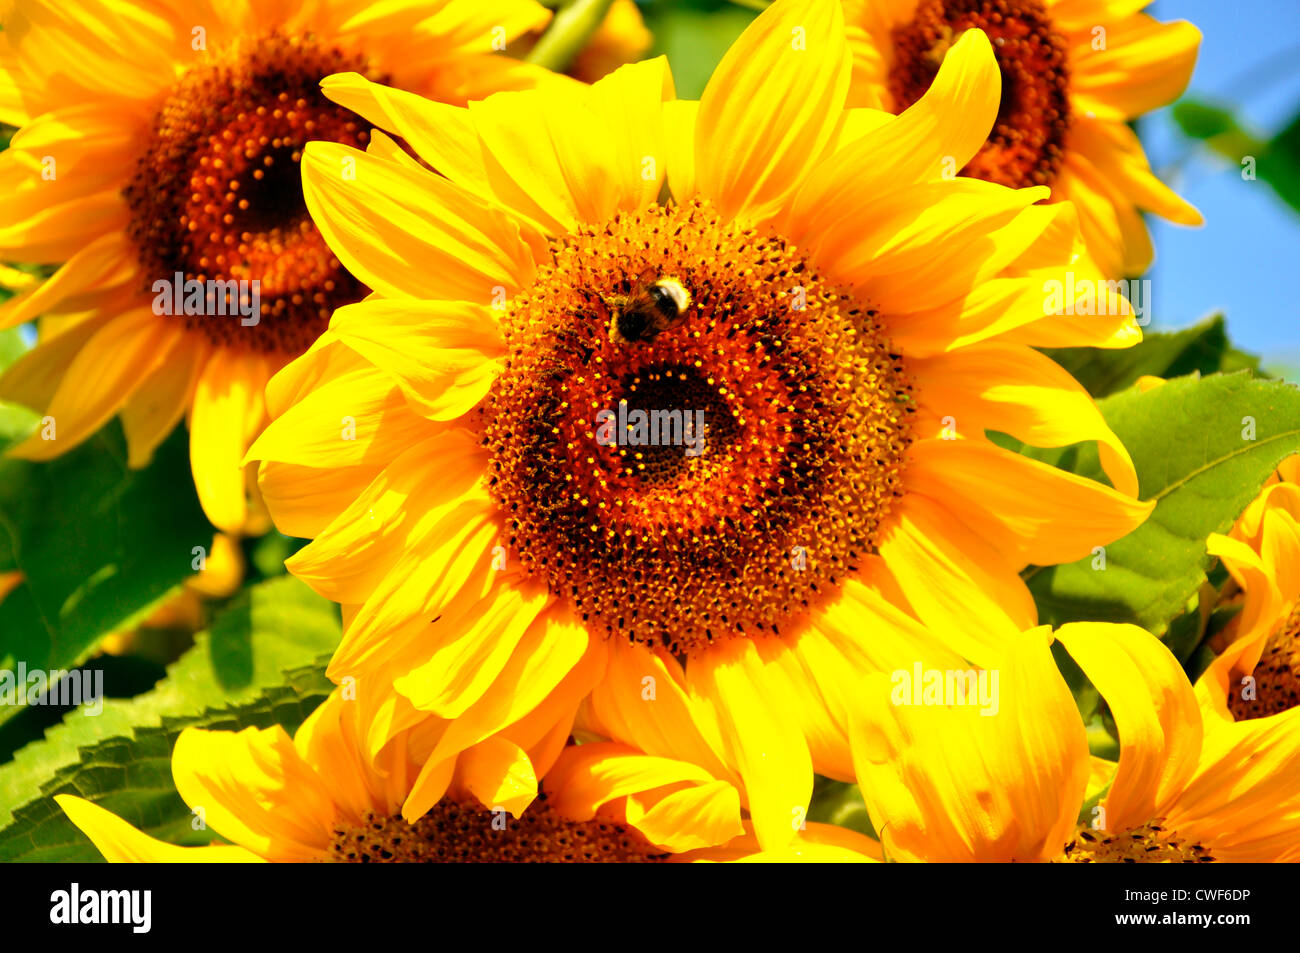 Beautiful, bright Sunflowers with a bumblebee on one of them Stock Photo